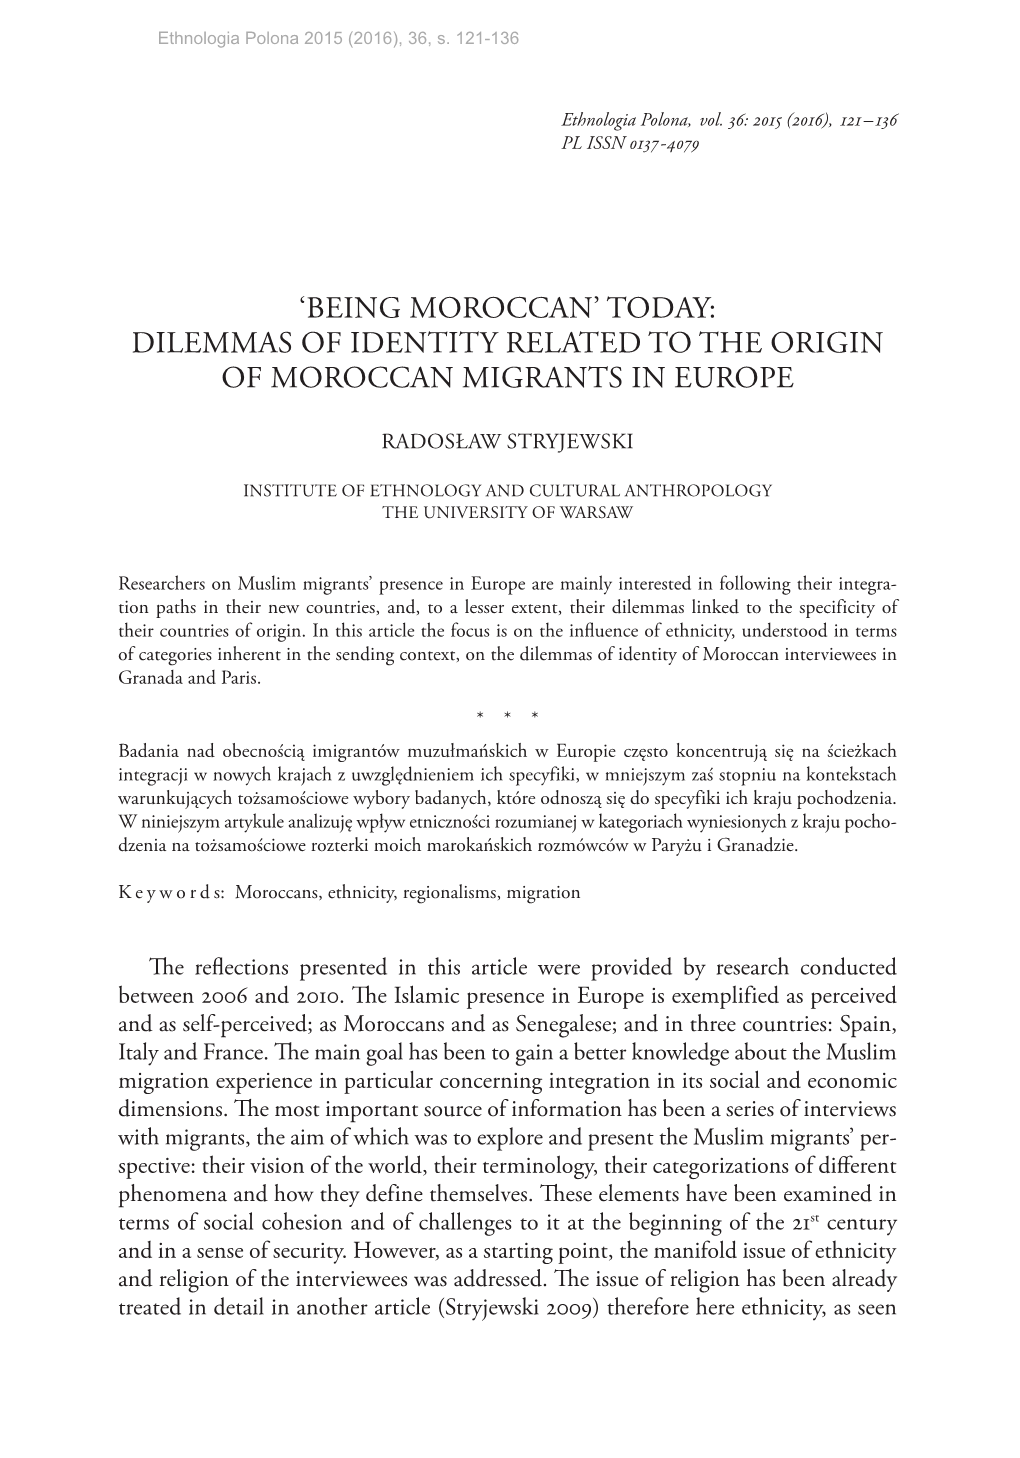 Being Moroccan’ Today: Dilemmas of Identity Related to the Origin of Moroccan Migrants in Europe